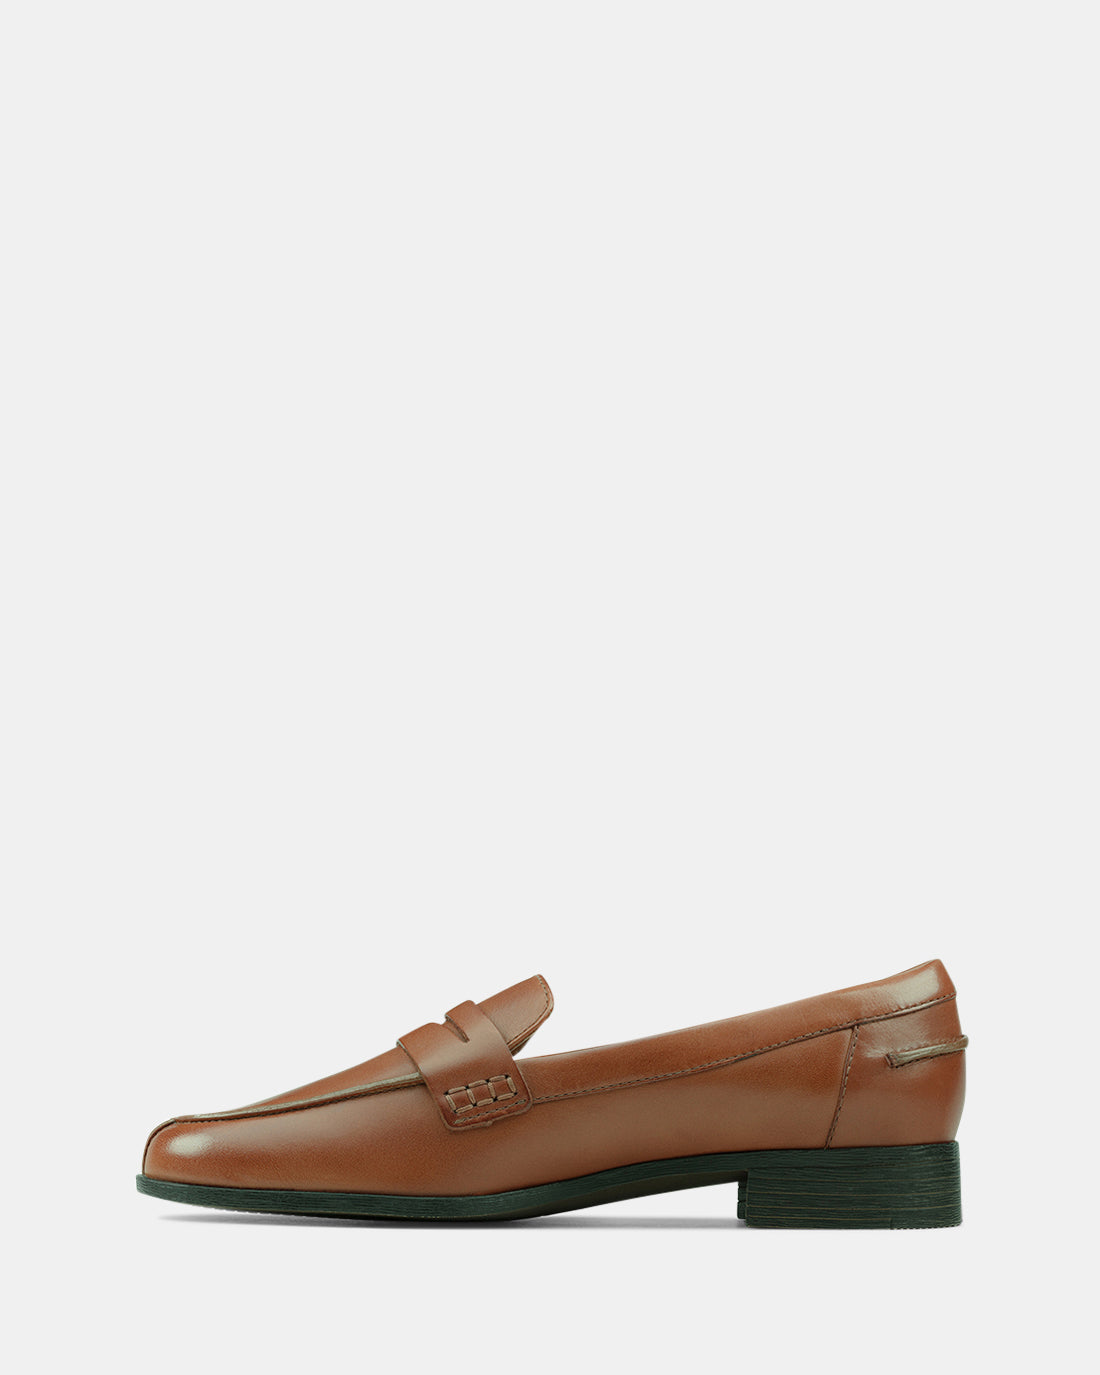 Hamble Loafer Tan Leather – Clarks